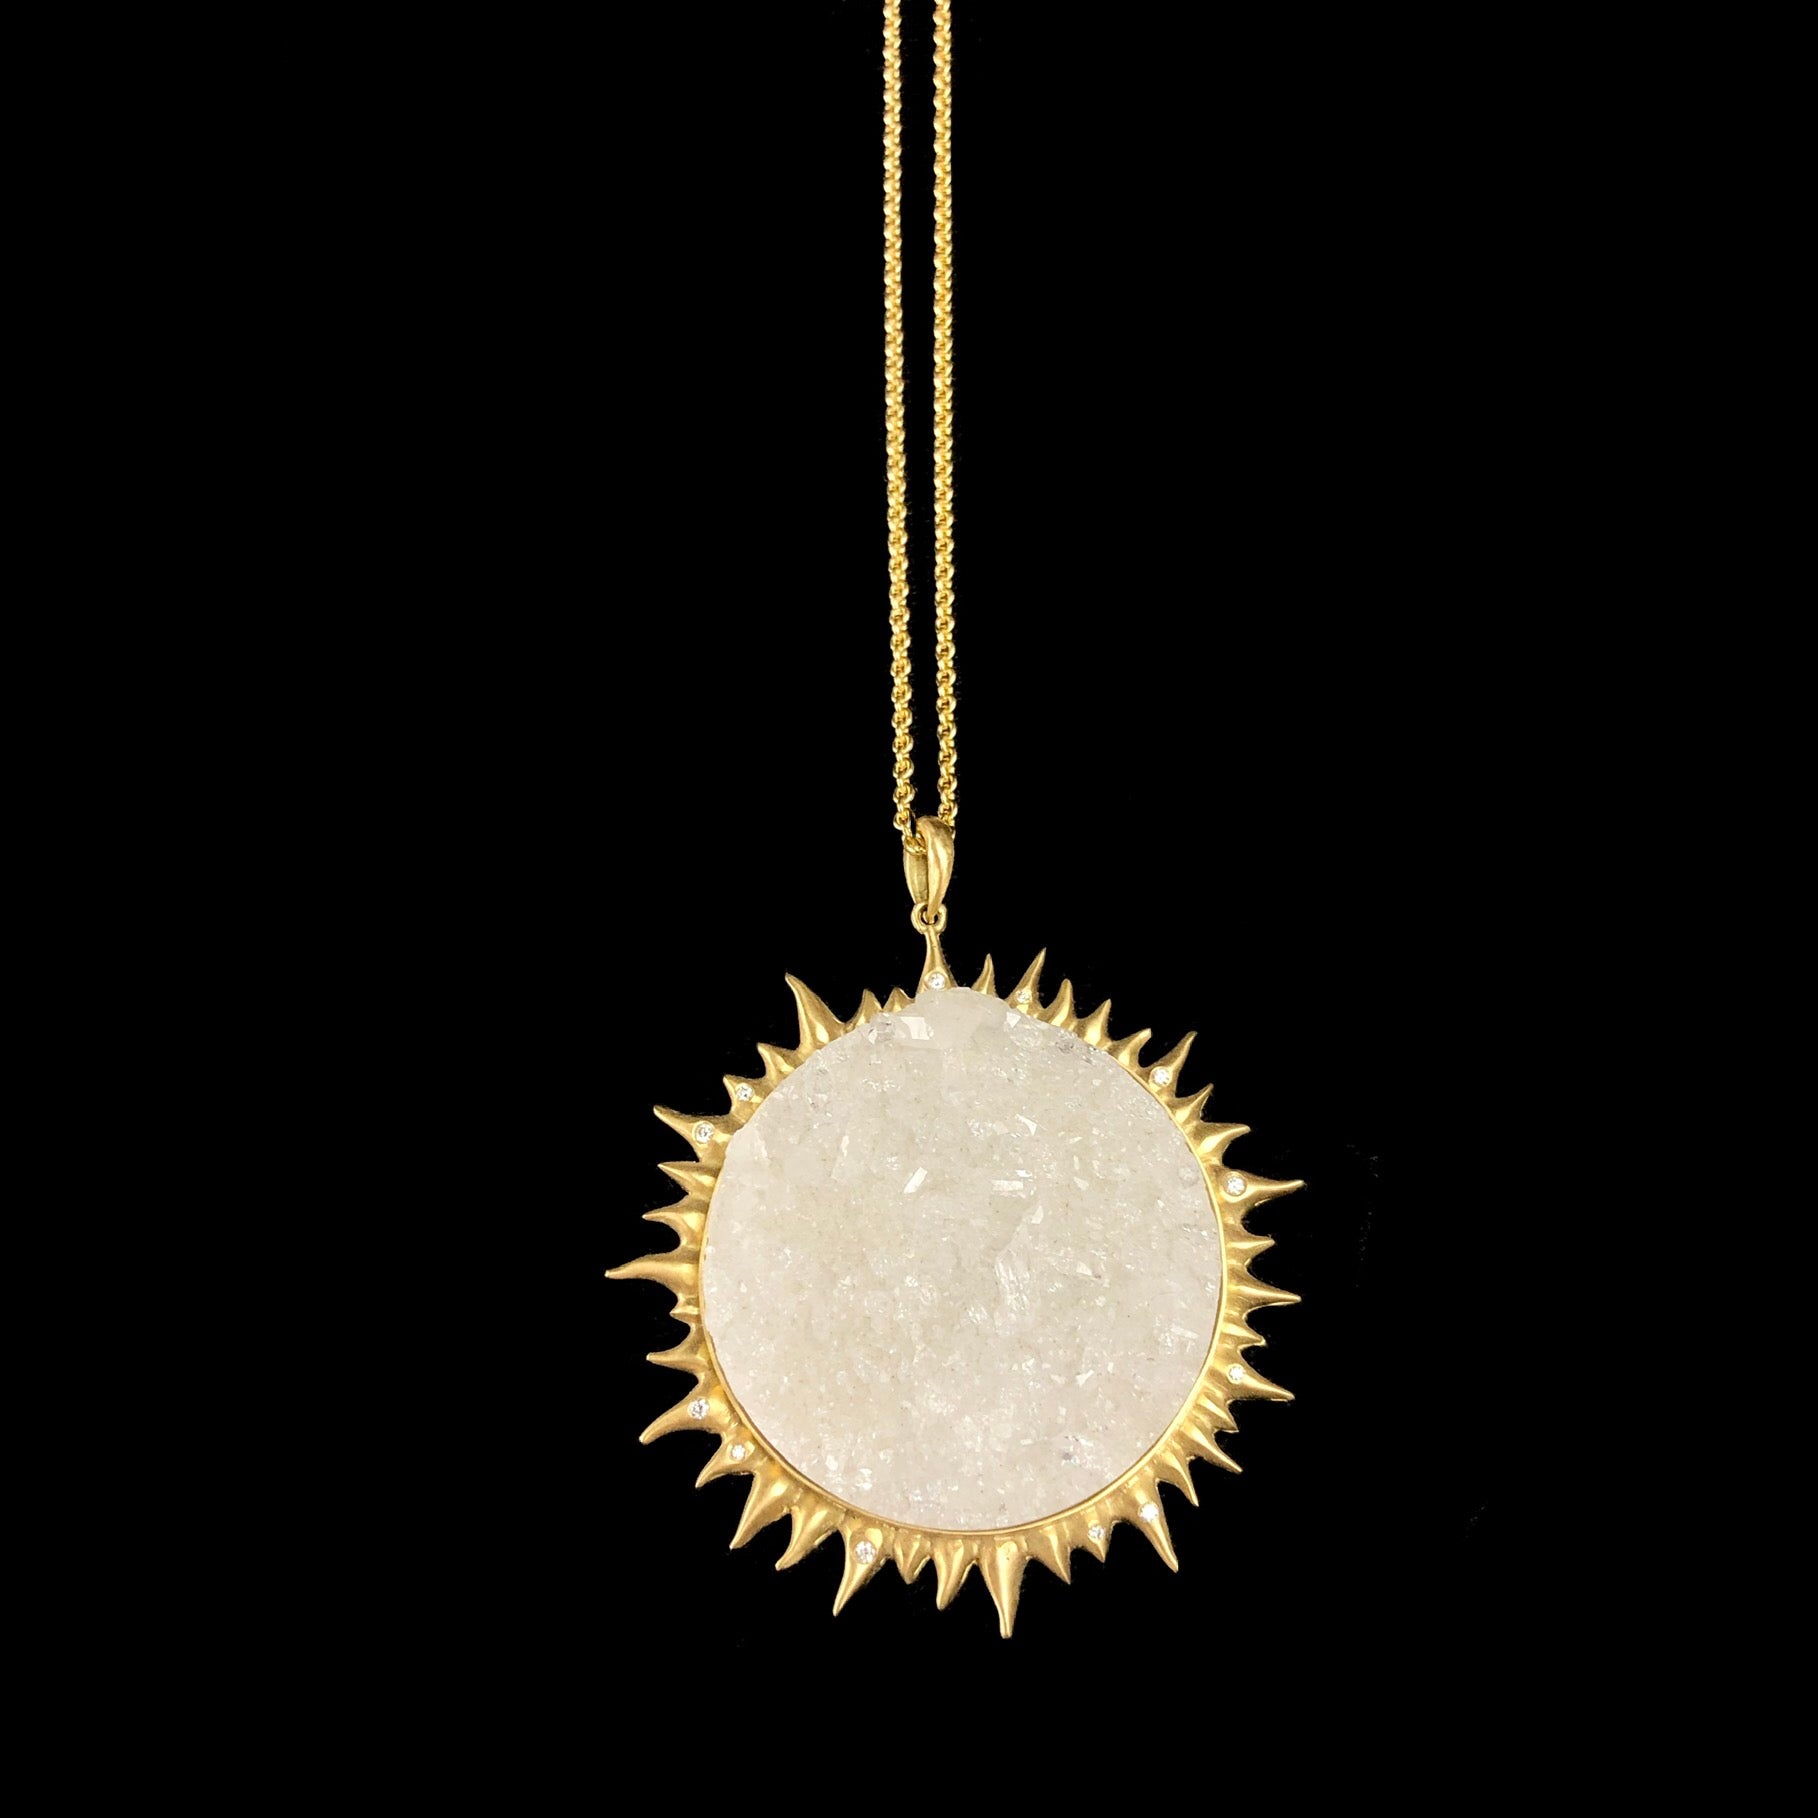 Round section of quartz crystals in gold setting resembling the rays of the sun on chain